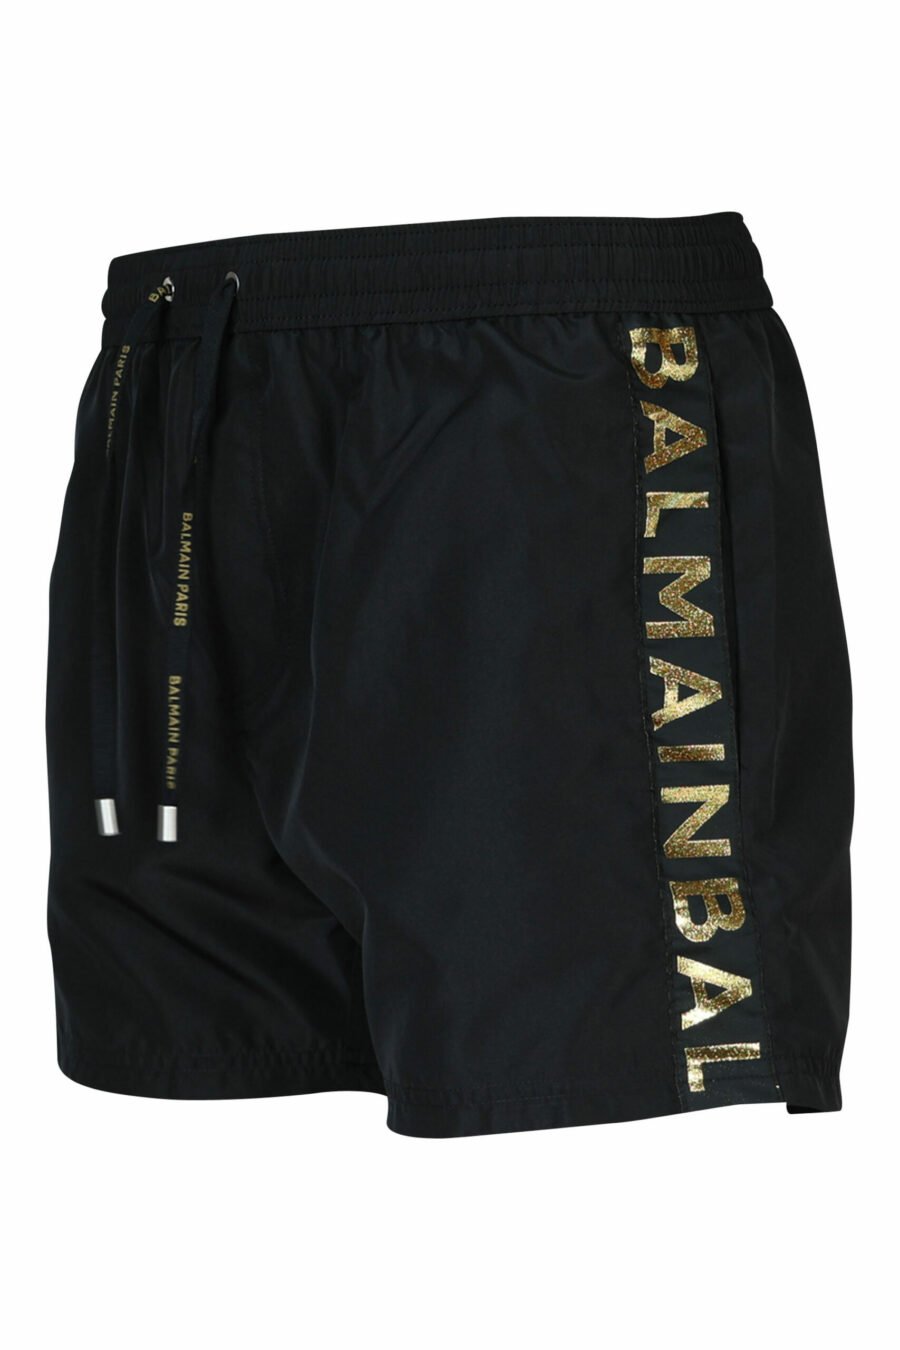 Black swimming costume with gold side band logo - 8032674796295 1 scaled